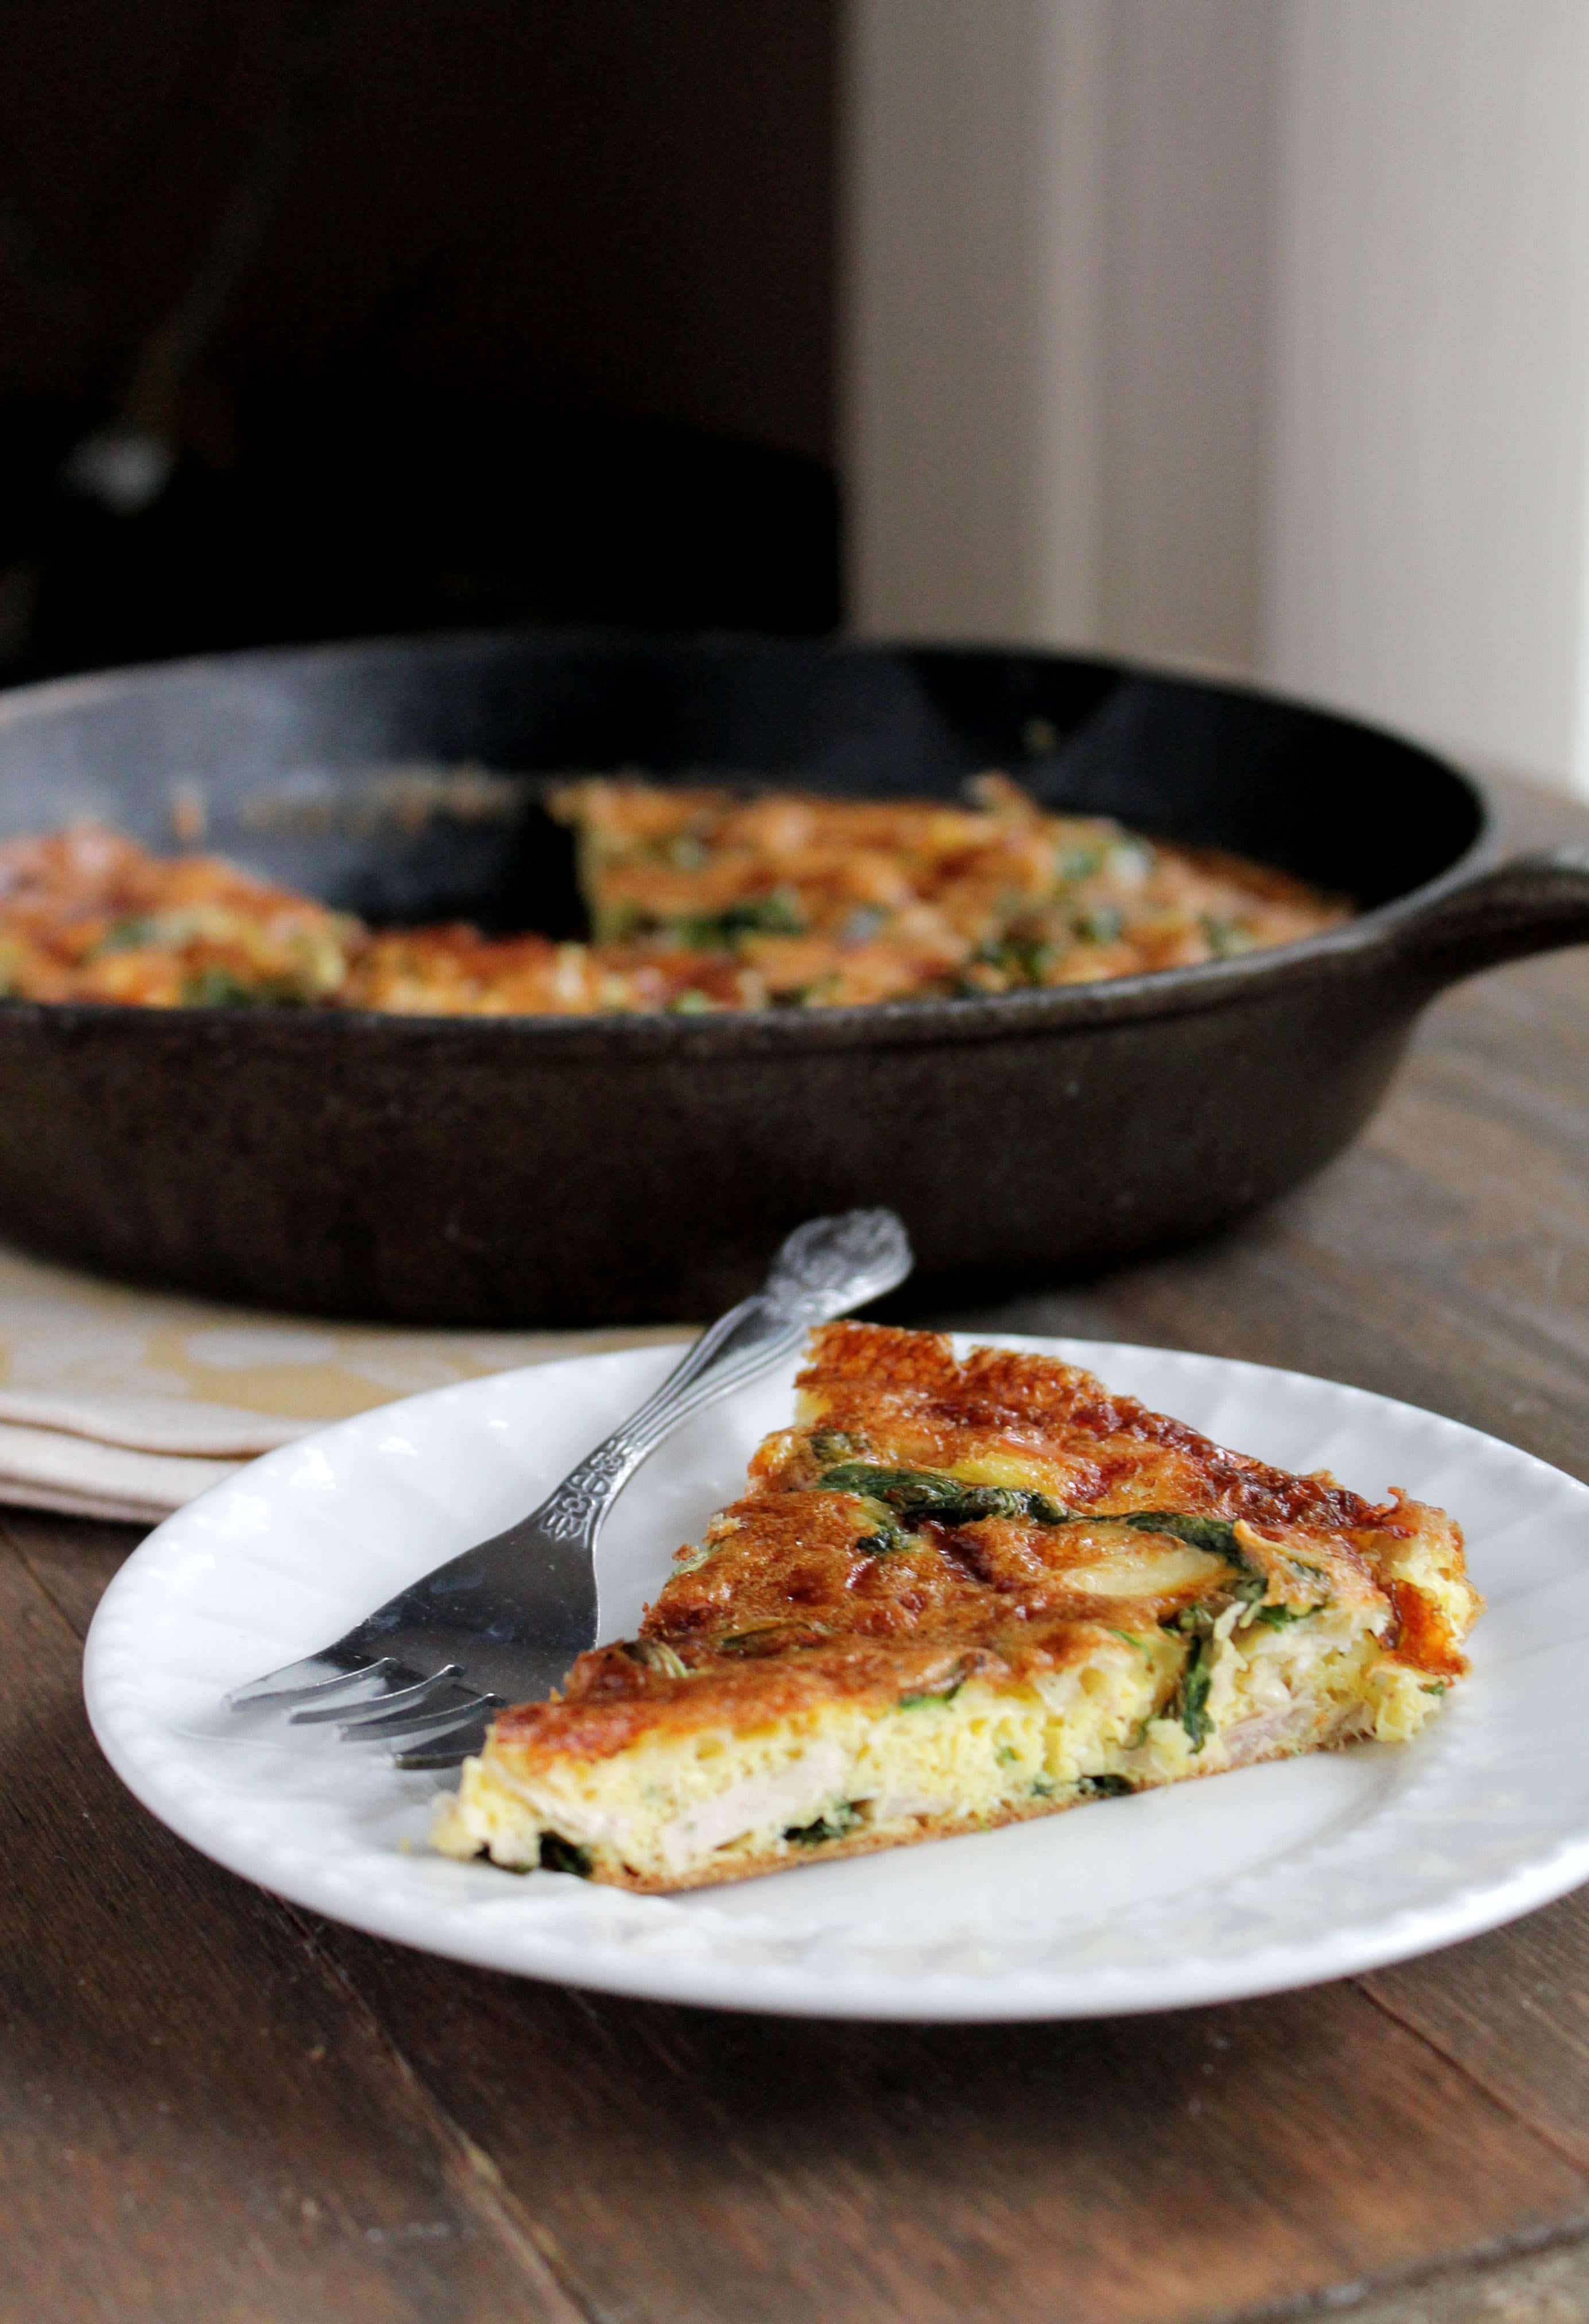 A slice of turkey frittata filled with spinach and mozzarella cheese on a plate, with the skillet in the background.